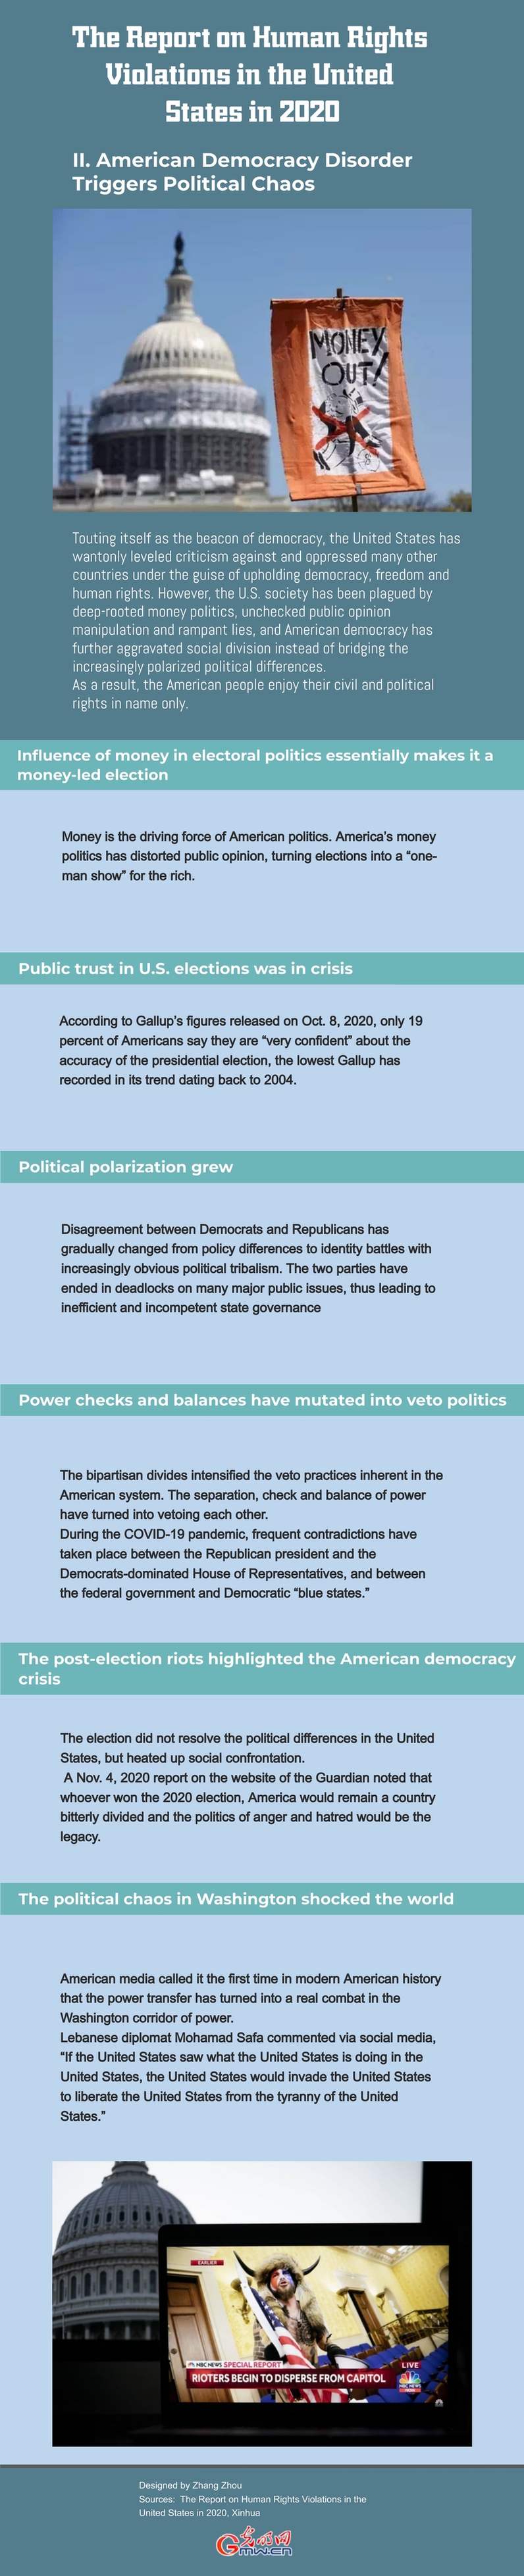 Infographic: American Democracy Disorder Triggers Political Chaos